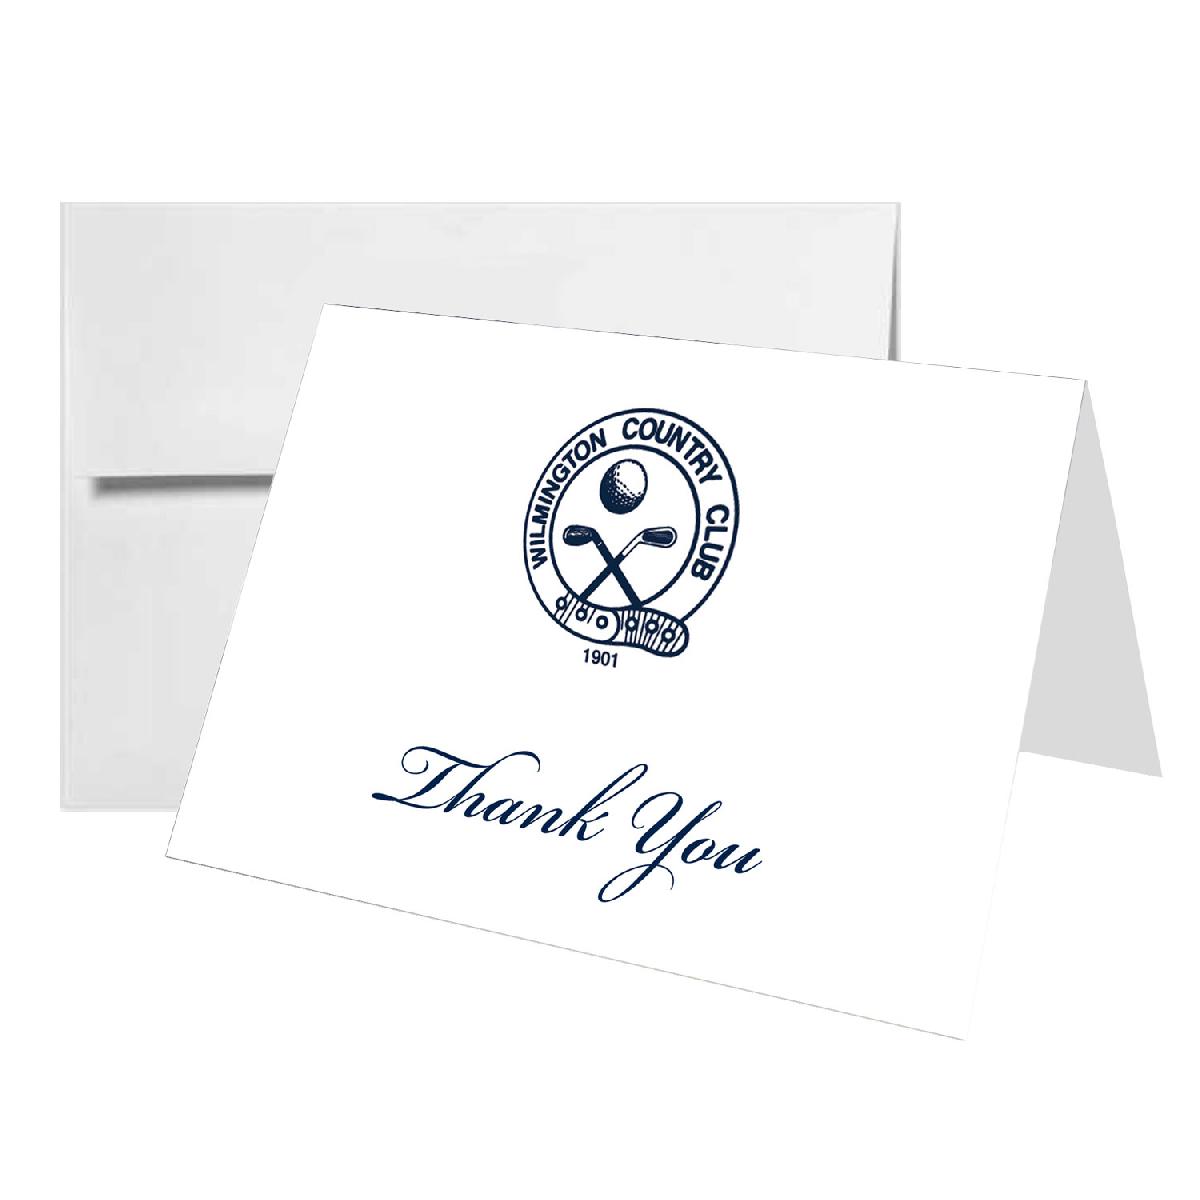 Announcement, Invitation, Thank You Cards with Envelopes - Glossy, 12pt Full Color Front - Size 4" x 6" - Standard